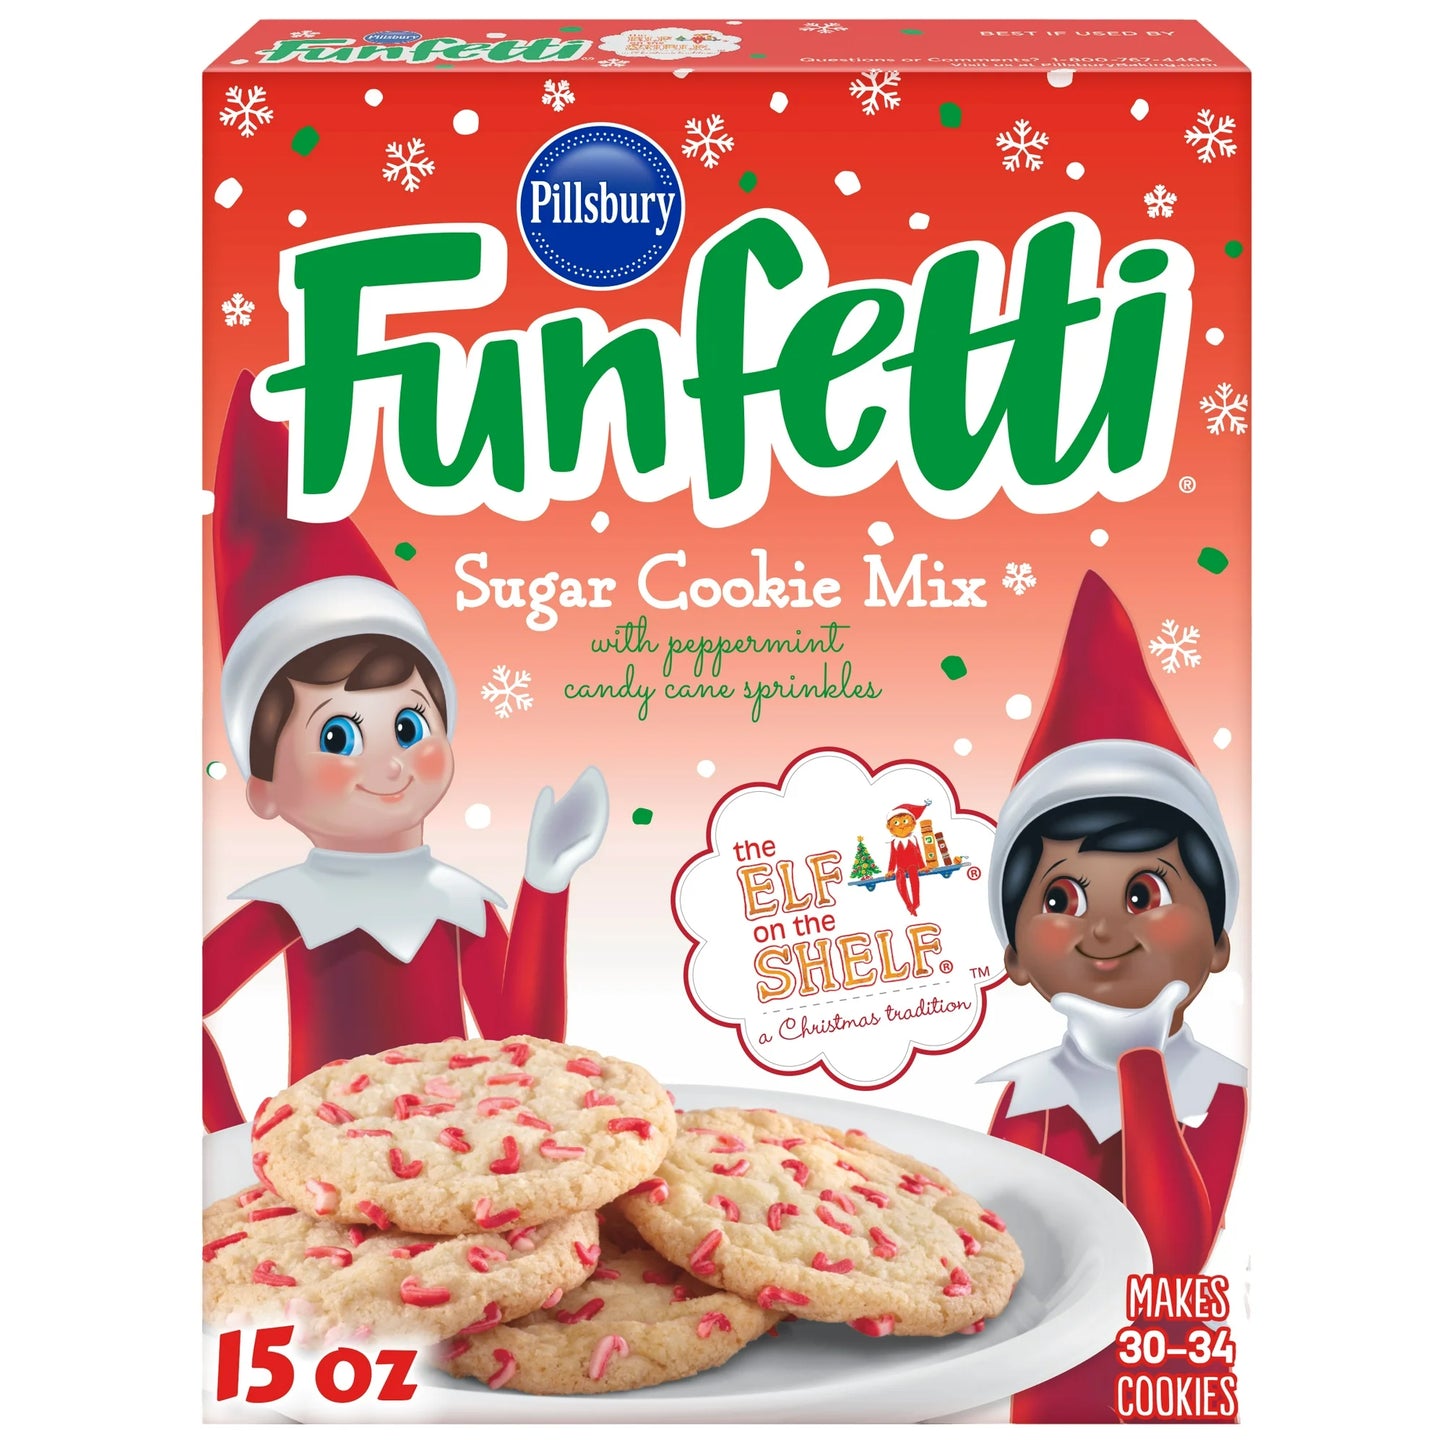 Pillsbury Funfetti The Elf on the Shelf® Sugar Cookie Mix with Peppermint Candy Cane Sprinkles, 15 Oz Box